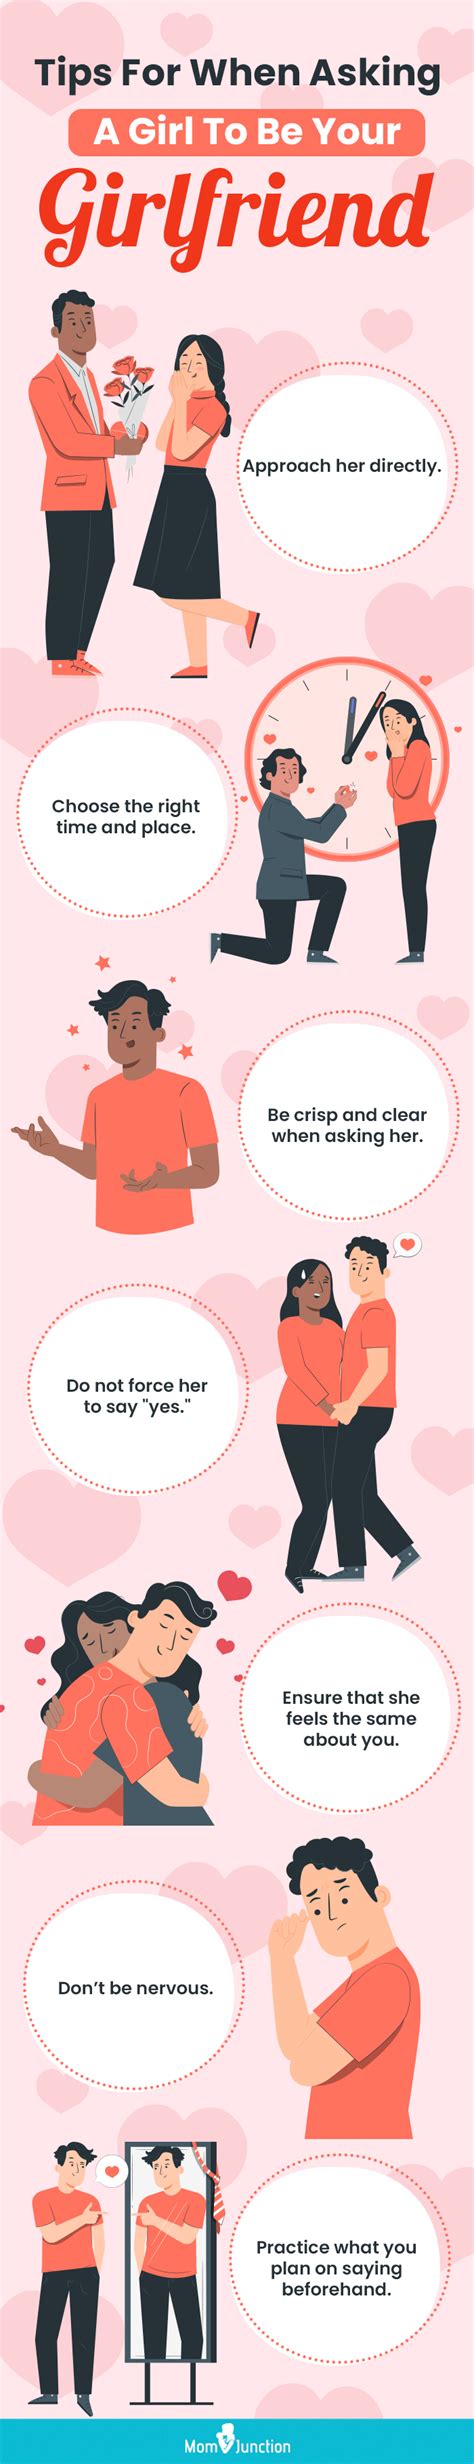 27 Romantic Ways To Ask A Girl To Be Your Girlfriend